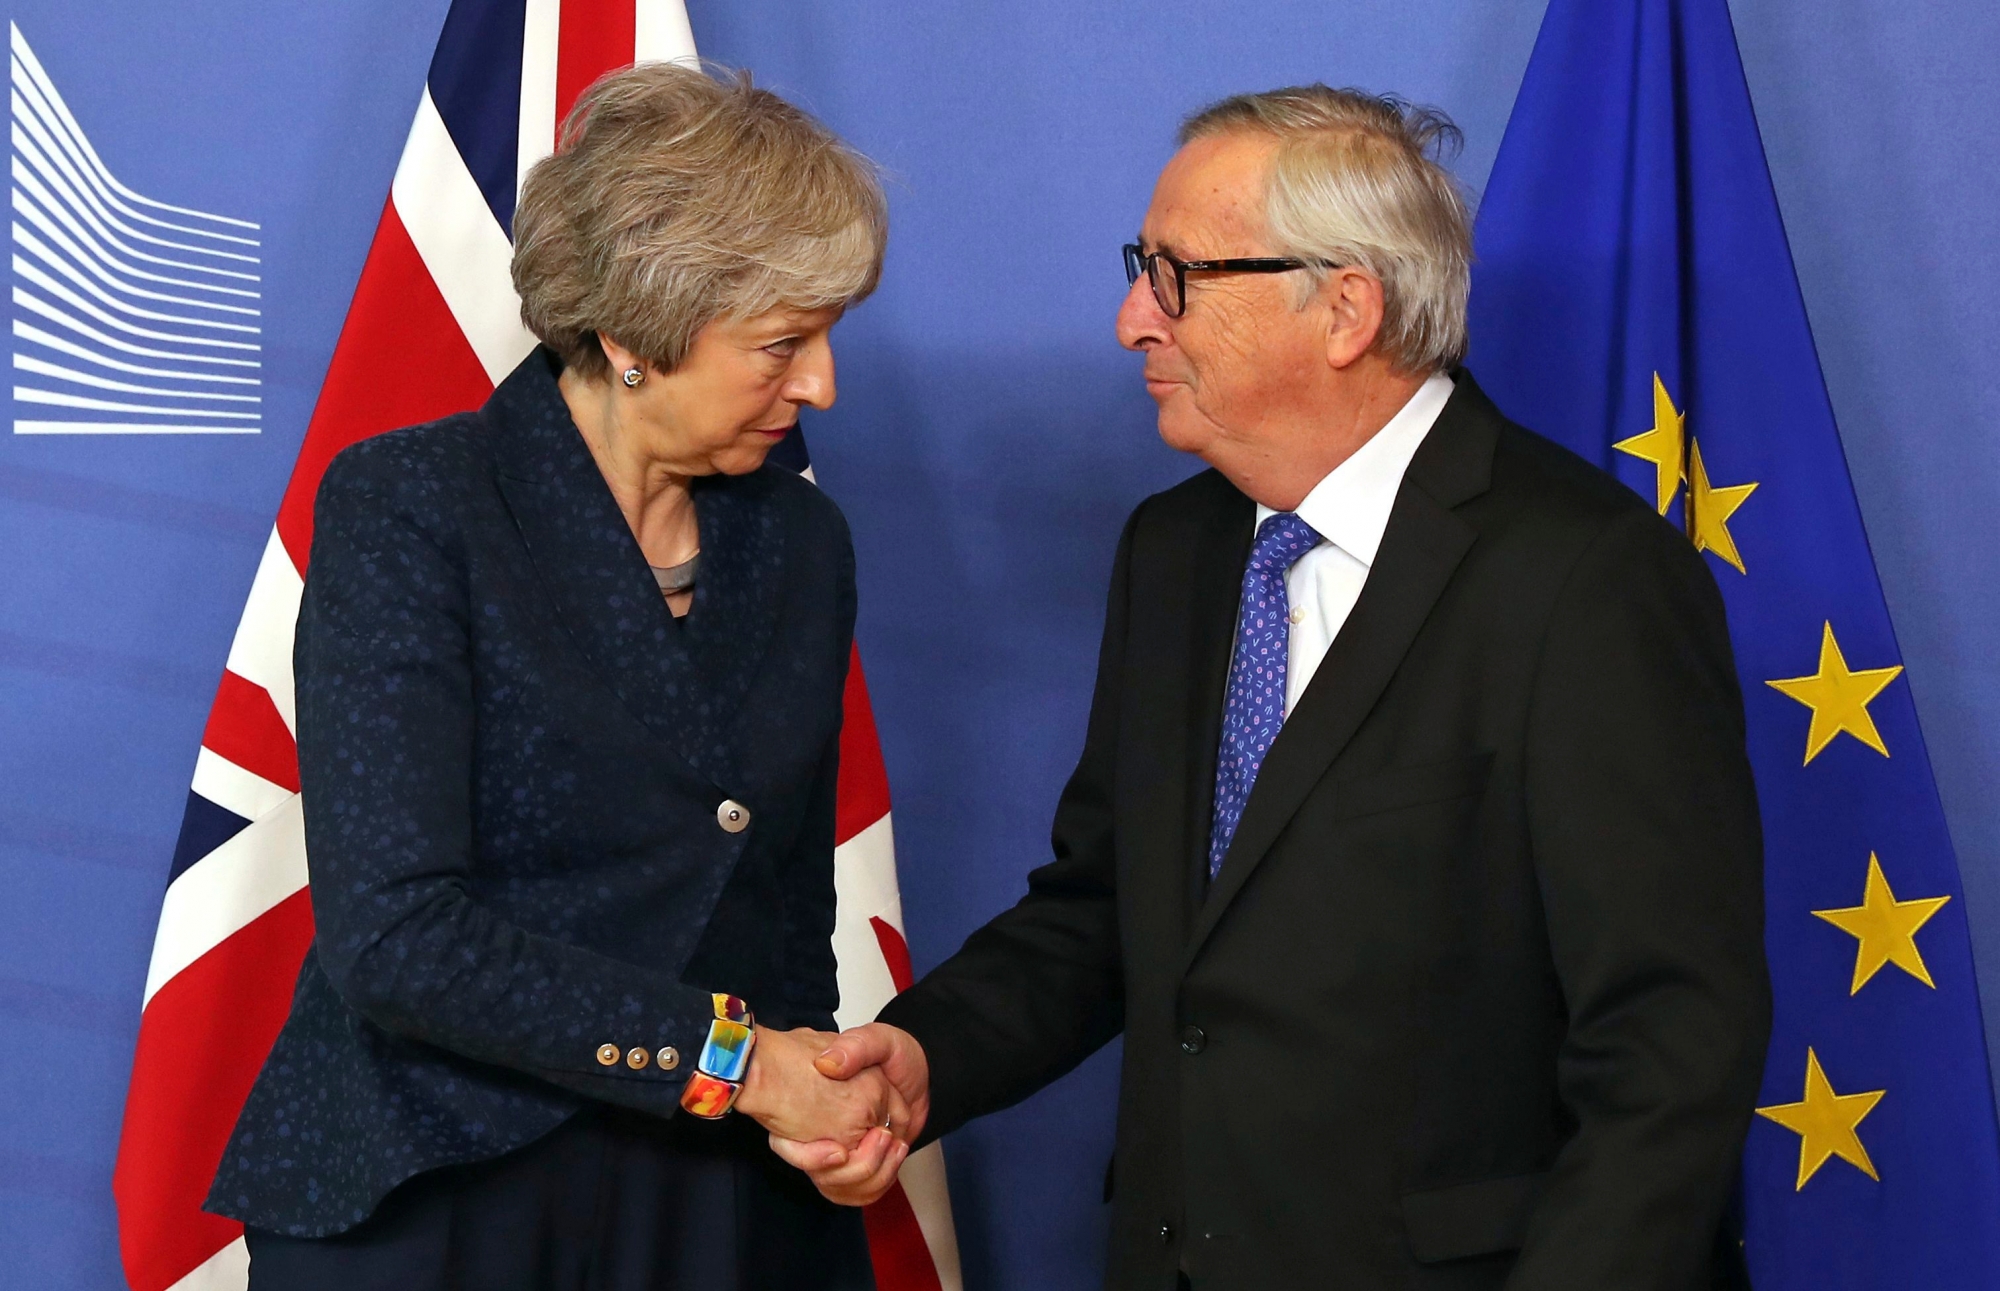 European Commission President Jean-Claude Juncker shakes hands with British Prime Minister Theresa May before their meeting at the European Commission headquarters in Brussels, Thursday, Feb. 7, 2019. (AP Photo/Francisco Seco) Belgium Brexit